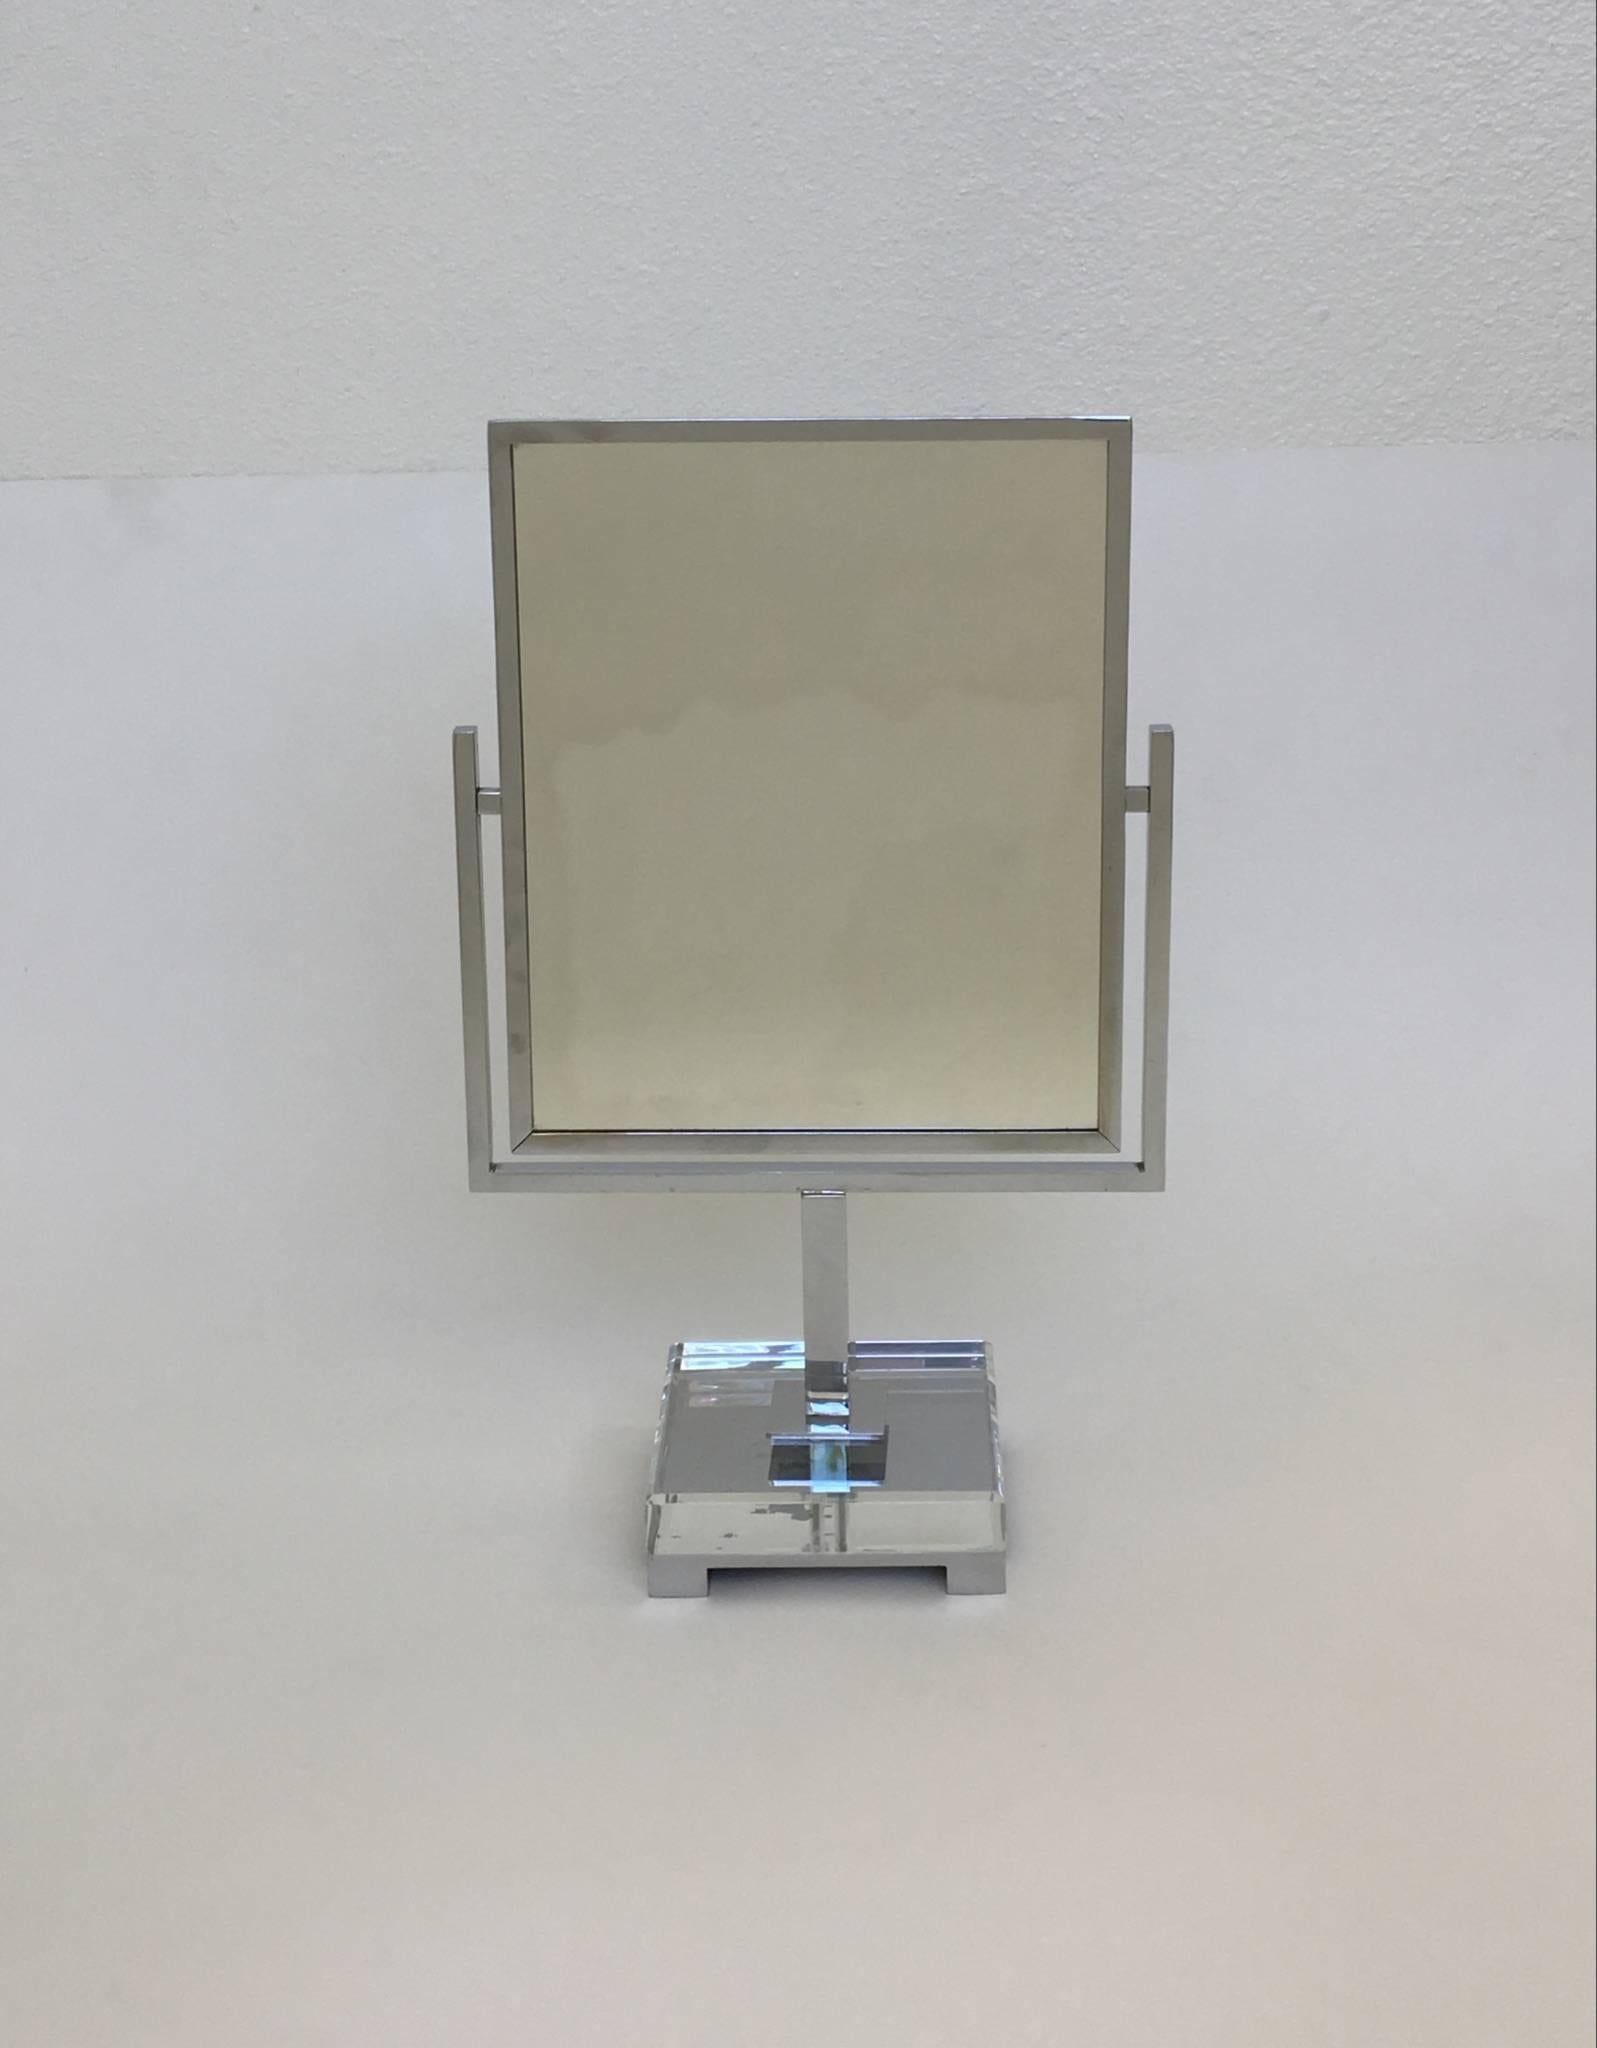 A signed chrome and glass double-sided mirror by Charles Hollis Jones.
The mirror was designed in the 1970s

Dimensions: 19